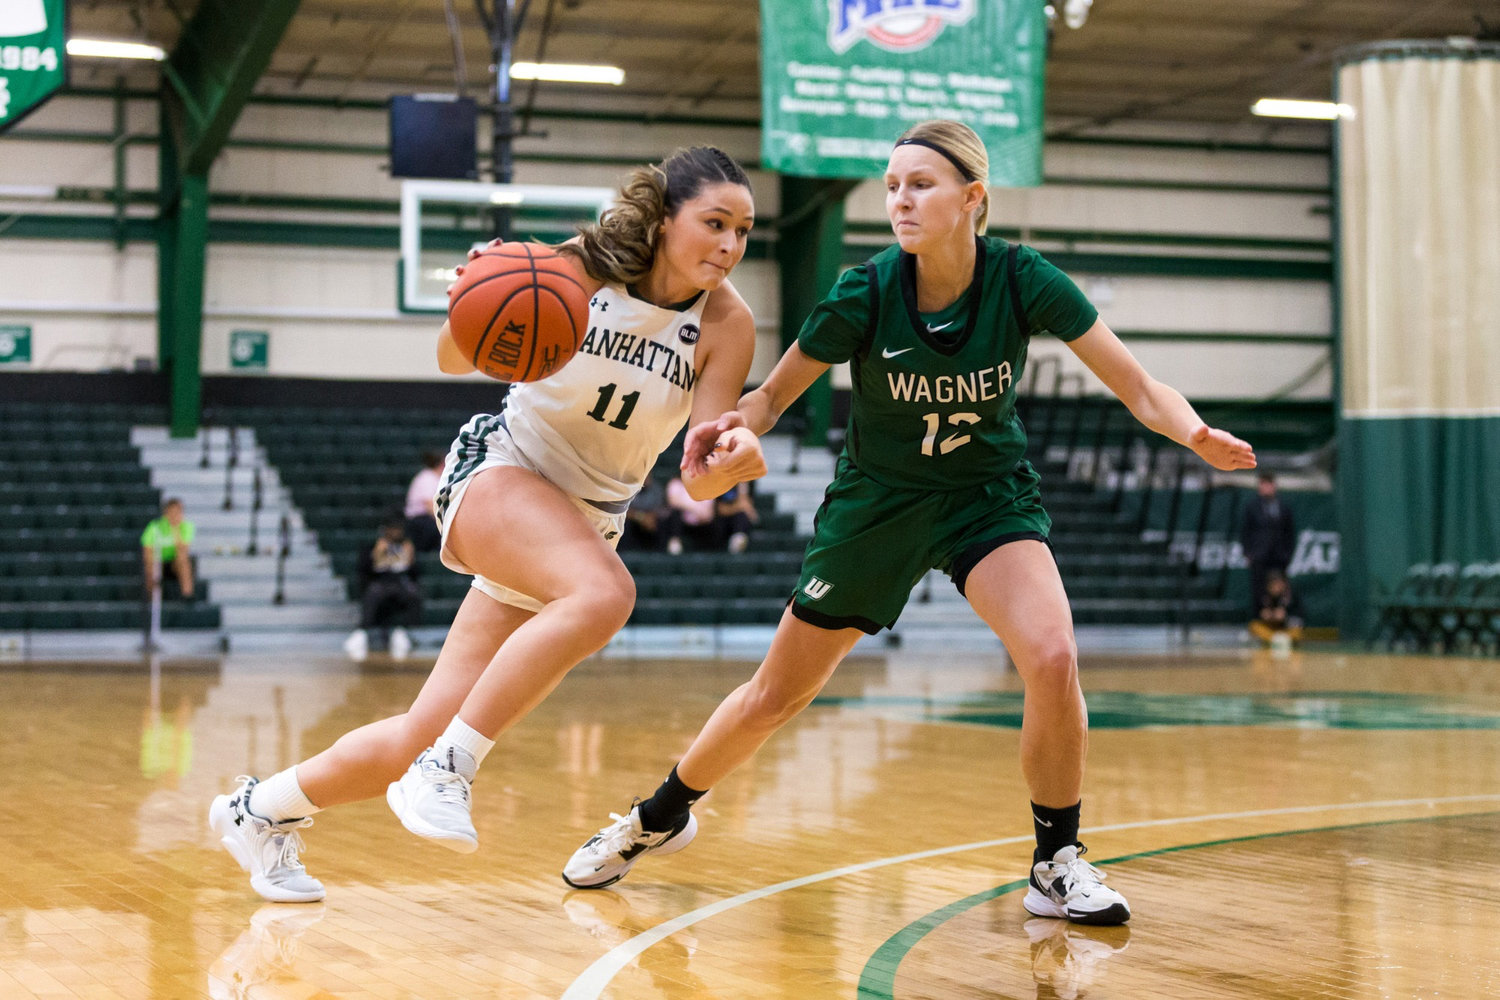 Emily LaPointe of Manhattan College drives toward the basket during the team’s game against Wagner College last week. The Jaspers lost 63-60 in OT.